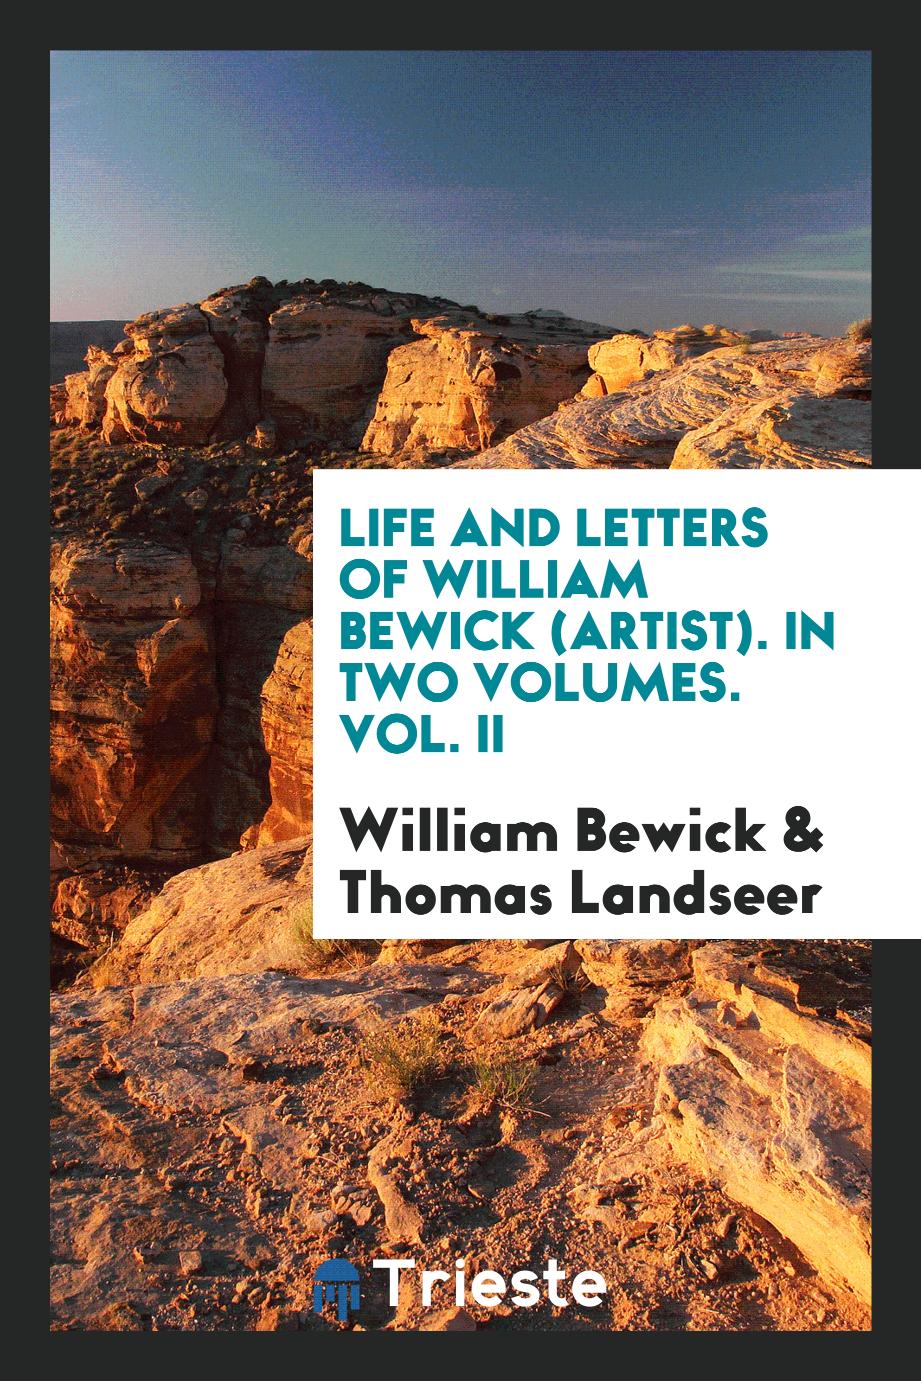 Life and Letters of William Bewick (Artist). In Two Volumes. Vol. II